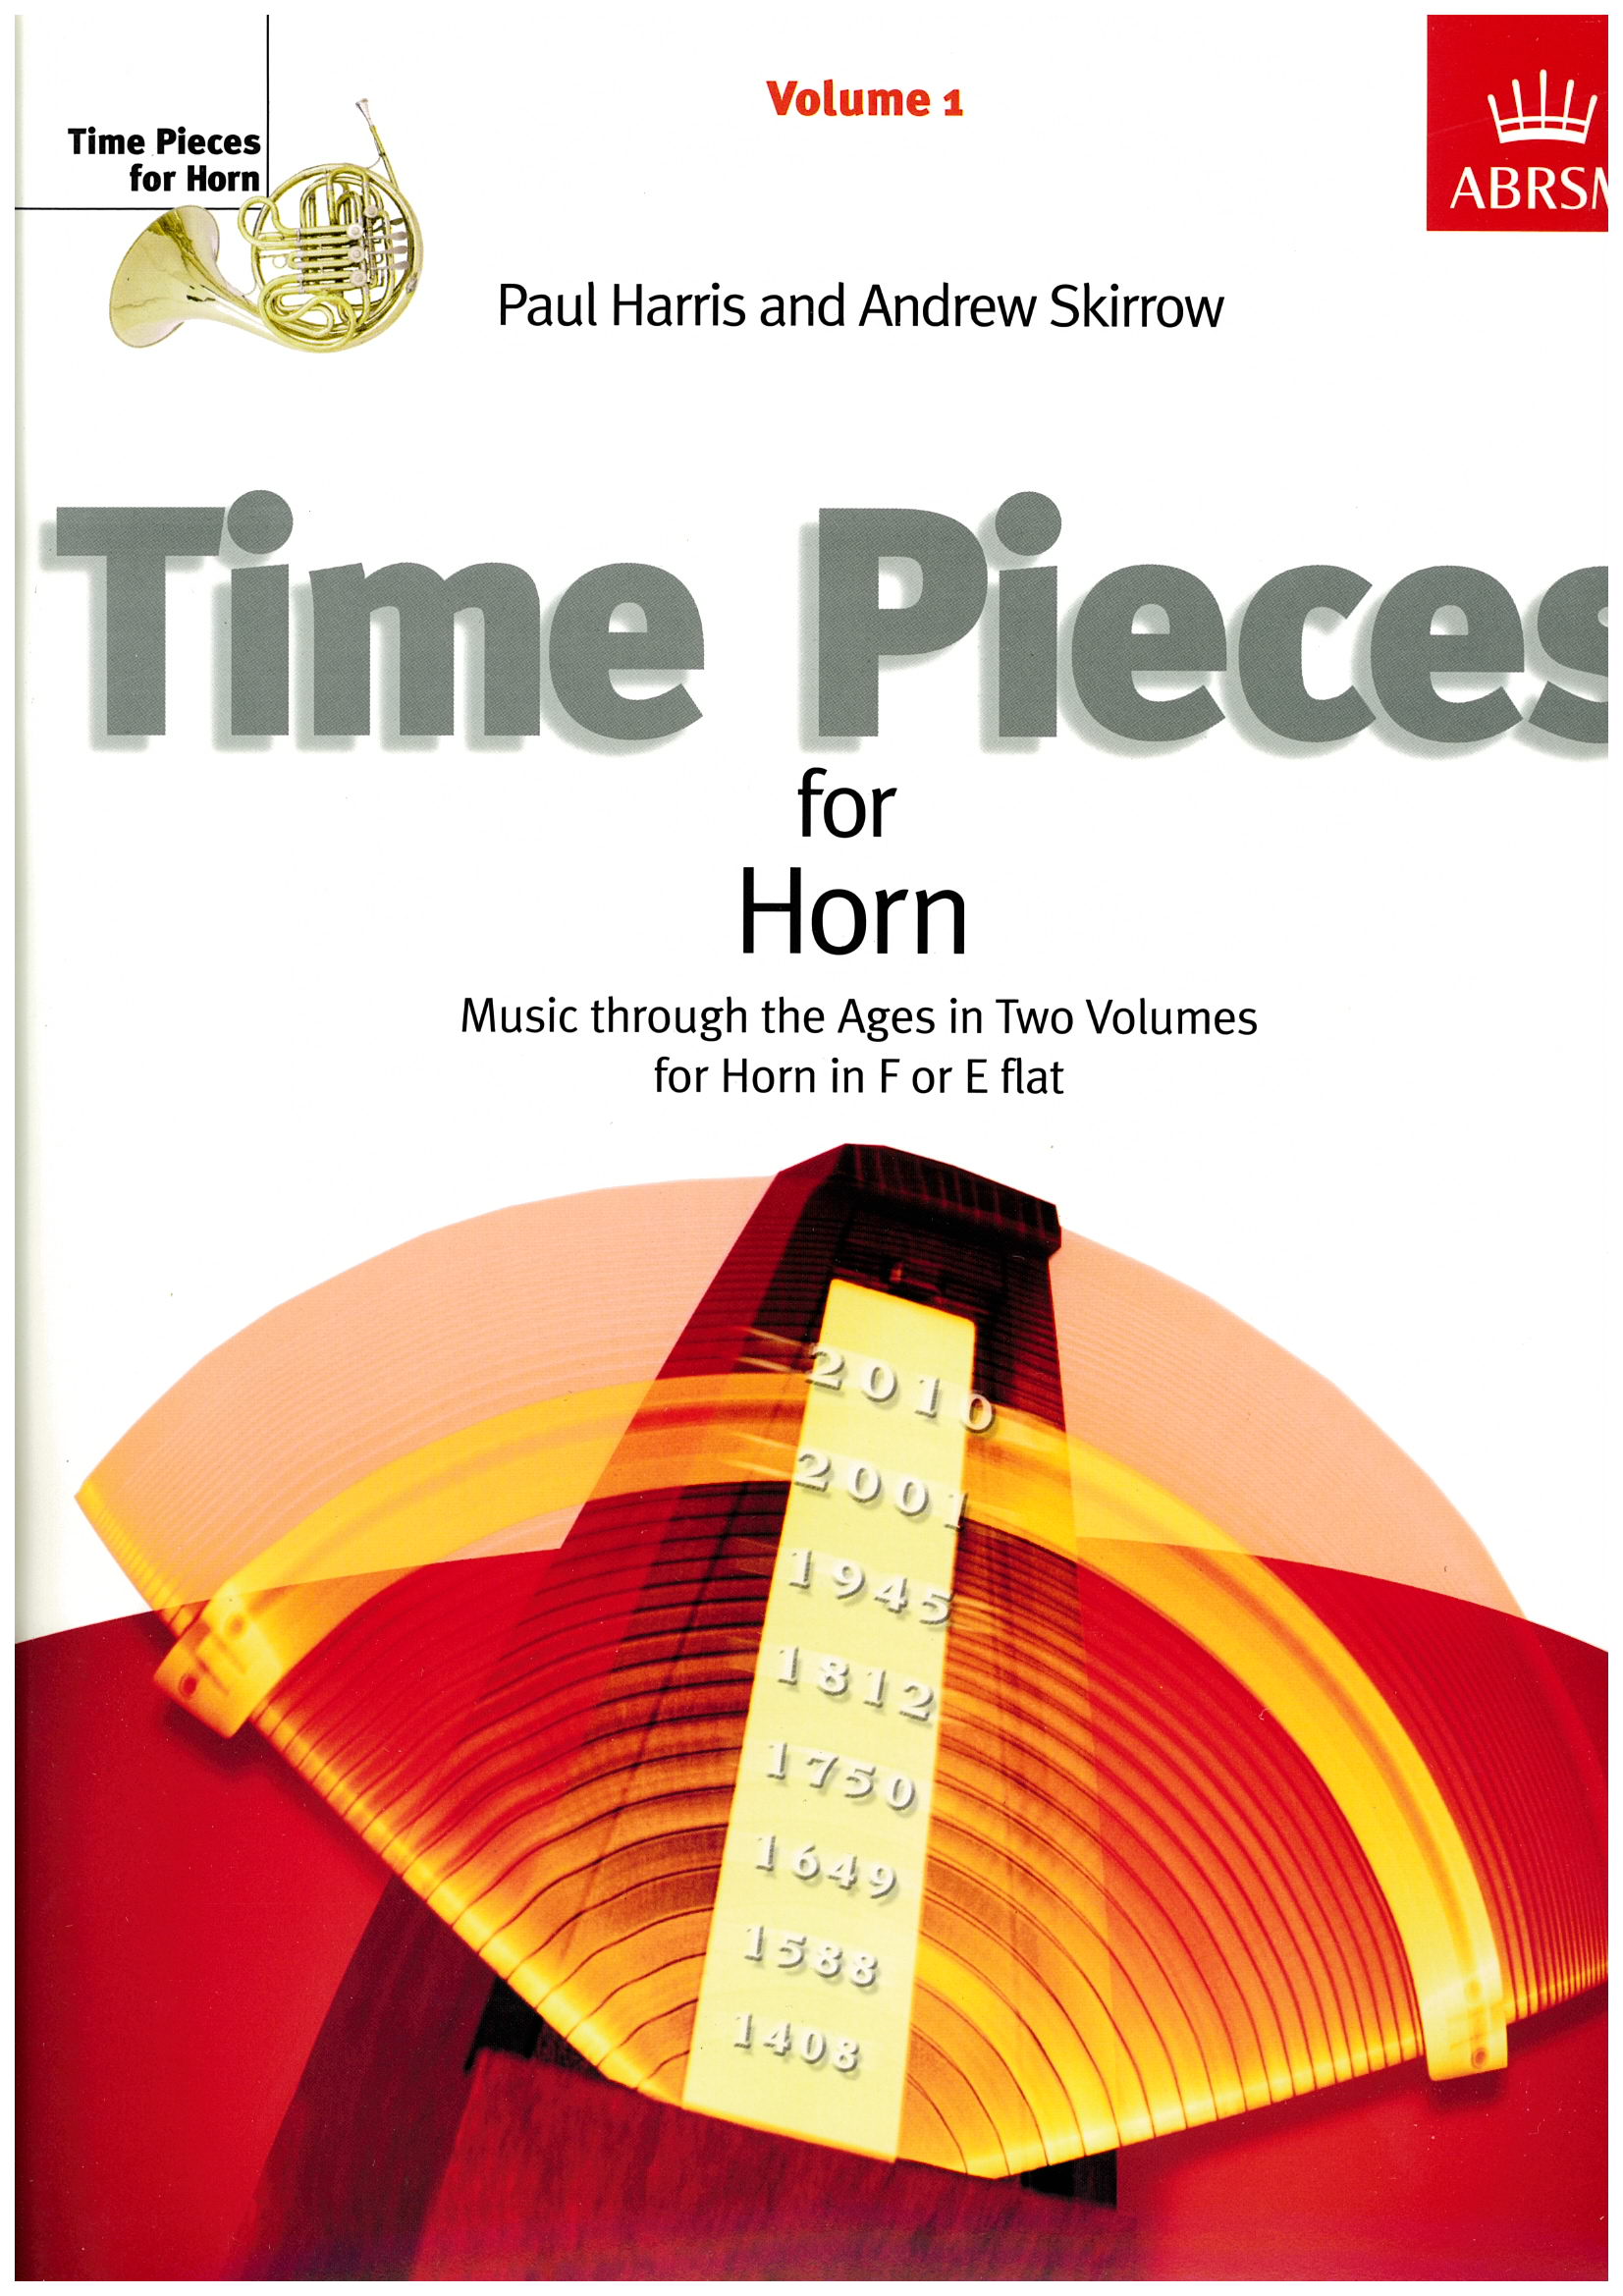 Time Pieces for Horn Volume 1 G1-3